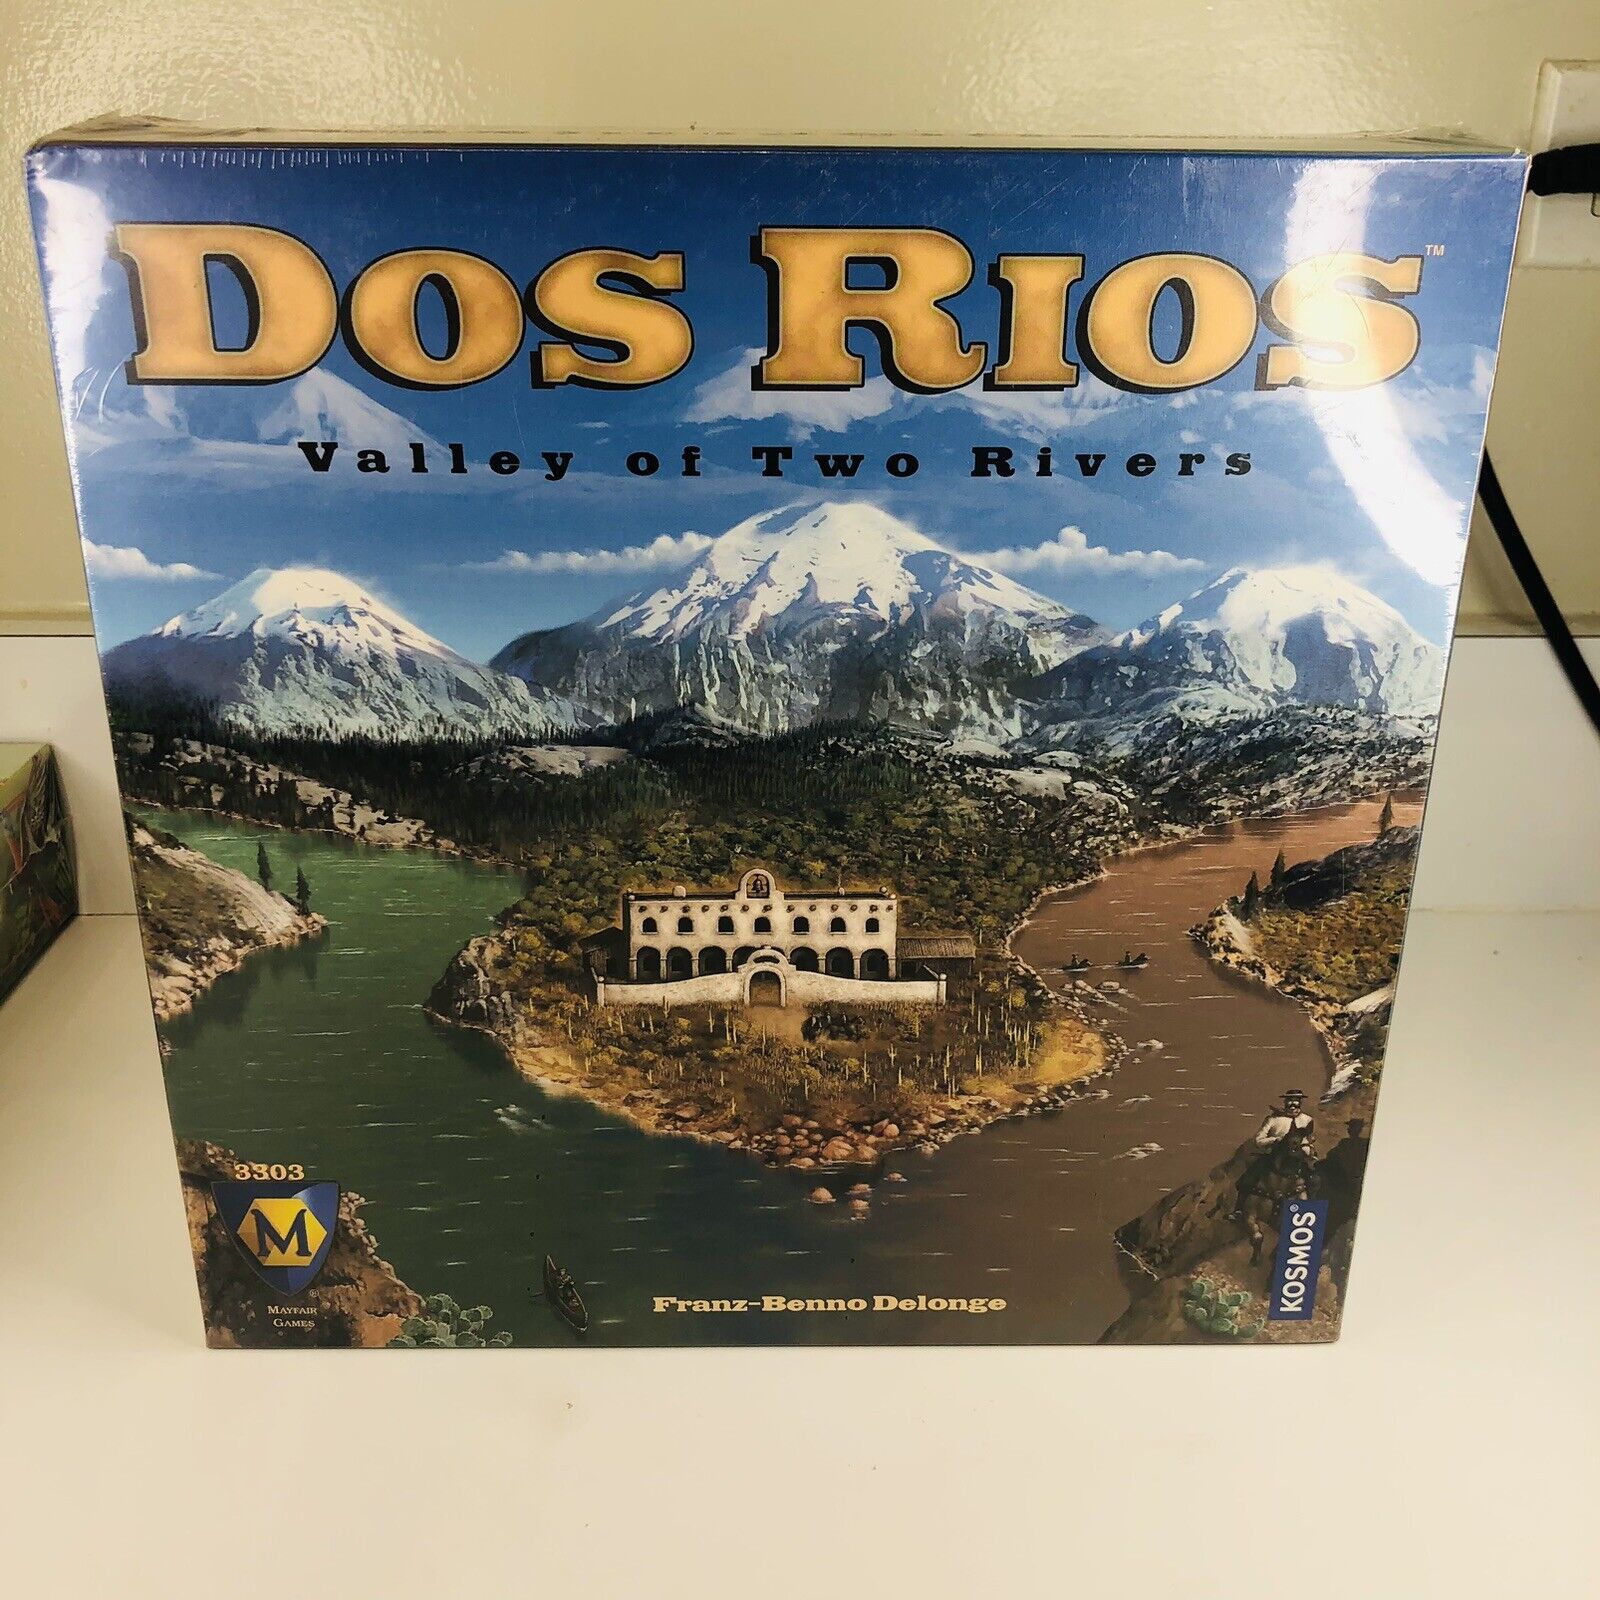 Dos Rios Valley of Two Rivers Board Game Mayfair Games New Sealed 3303 - $14.03